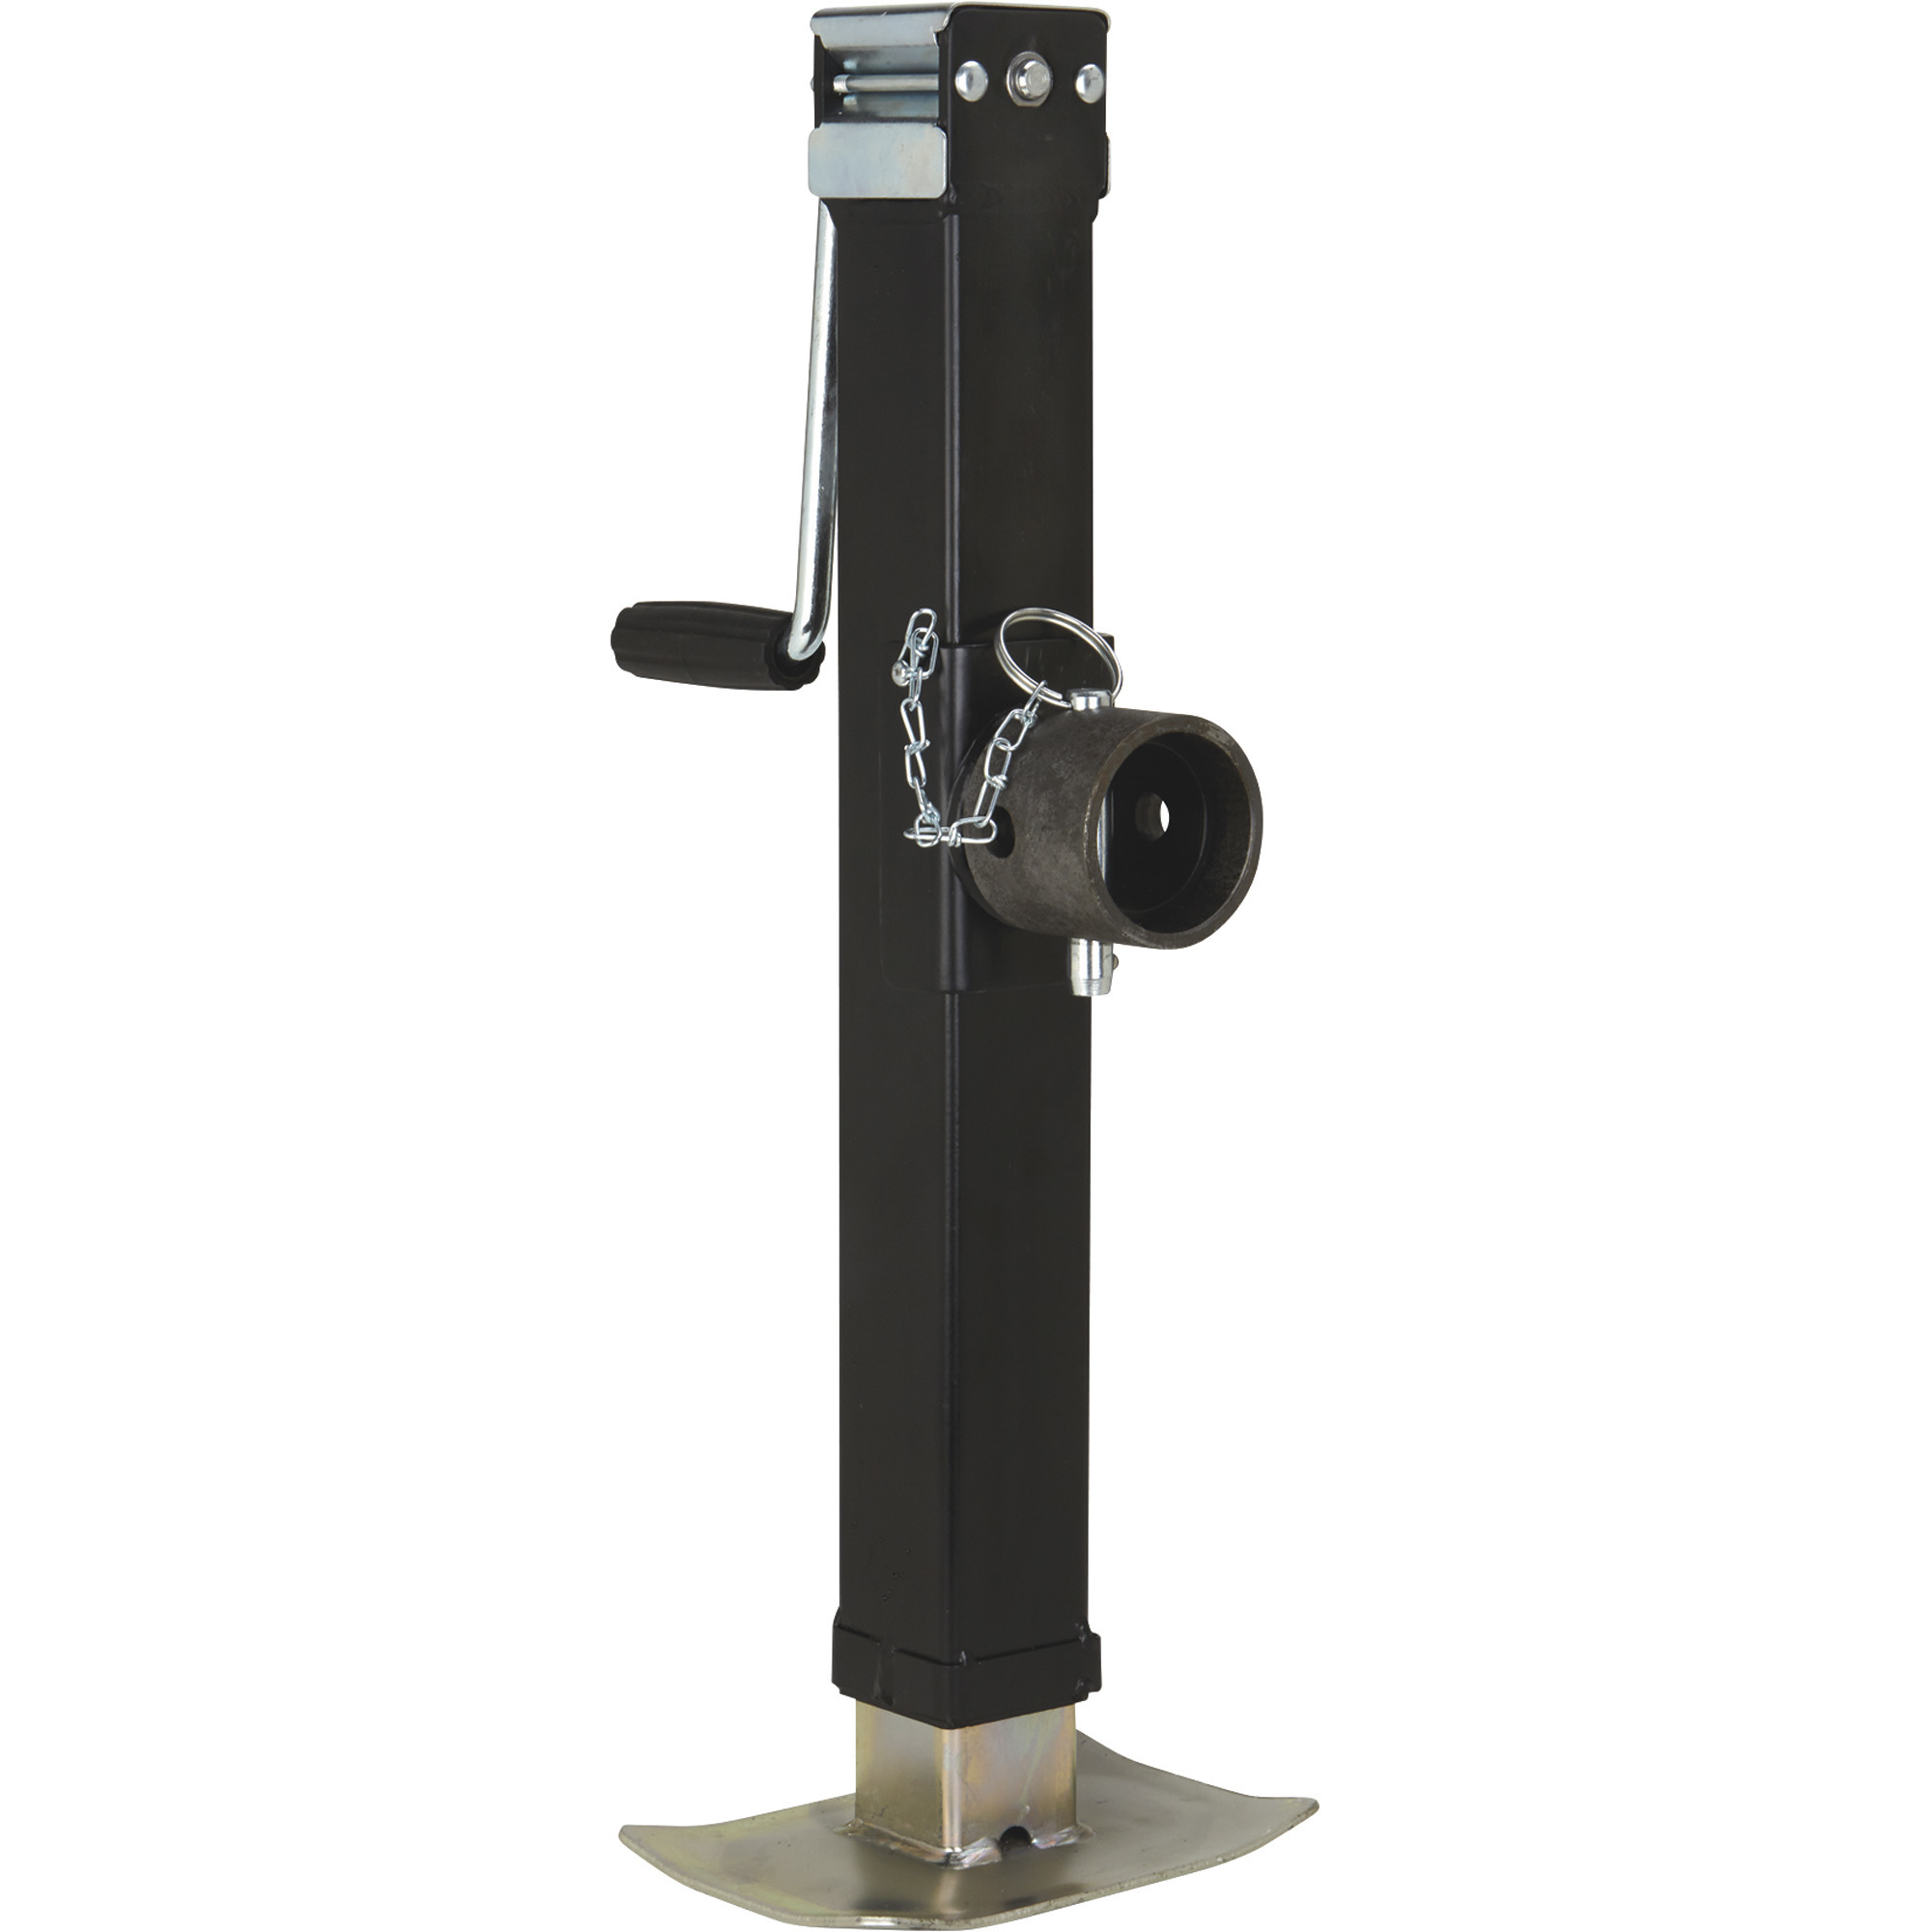 Ultra-Tow Sidewind Square Tube-Mount Jack, 5000-Lb. Lift Capacity